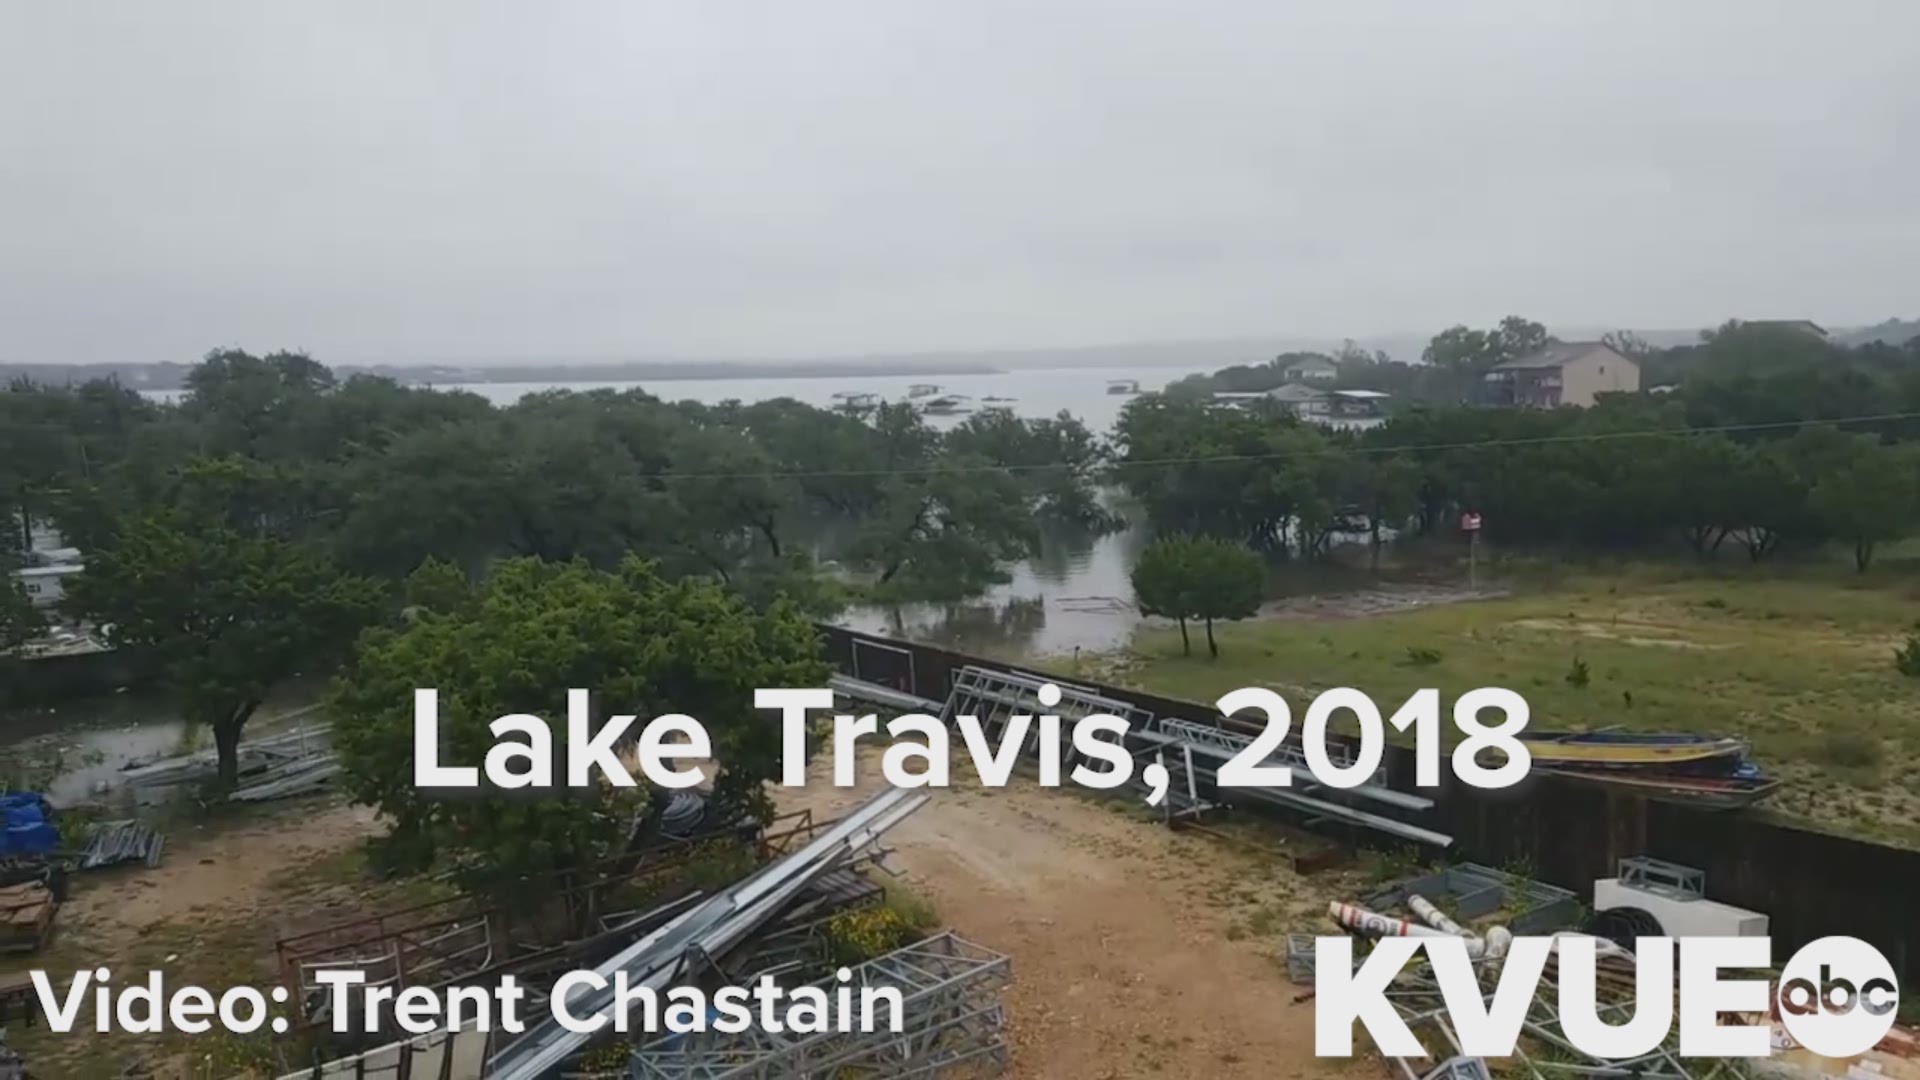 Trent Chastain has lived on Lake Travis for more than a decade in a home his great uncle owned.